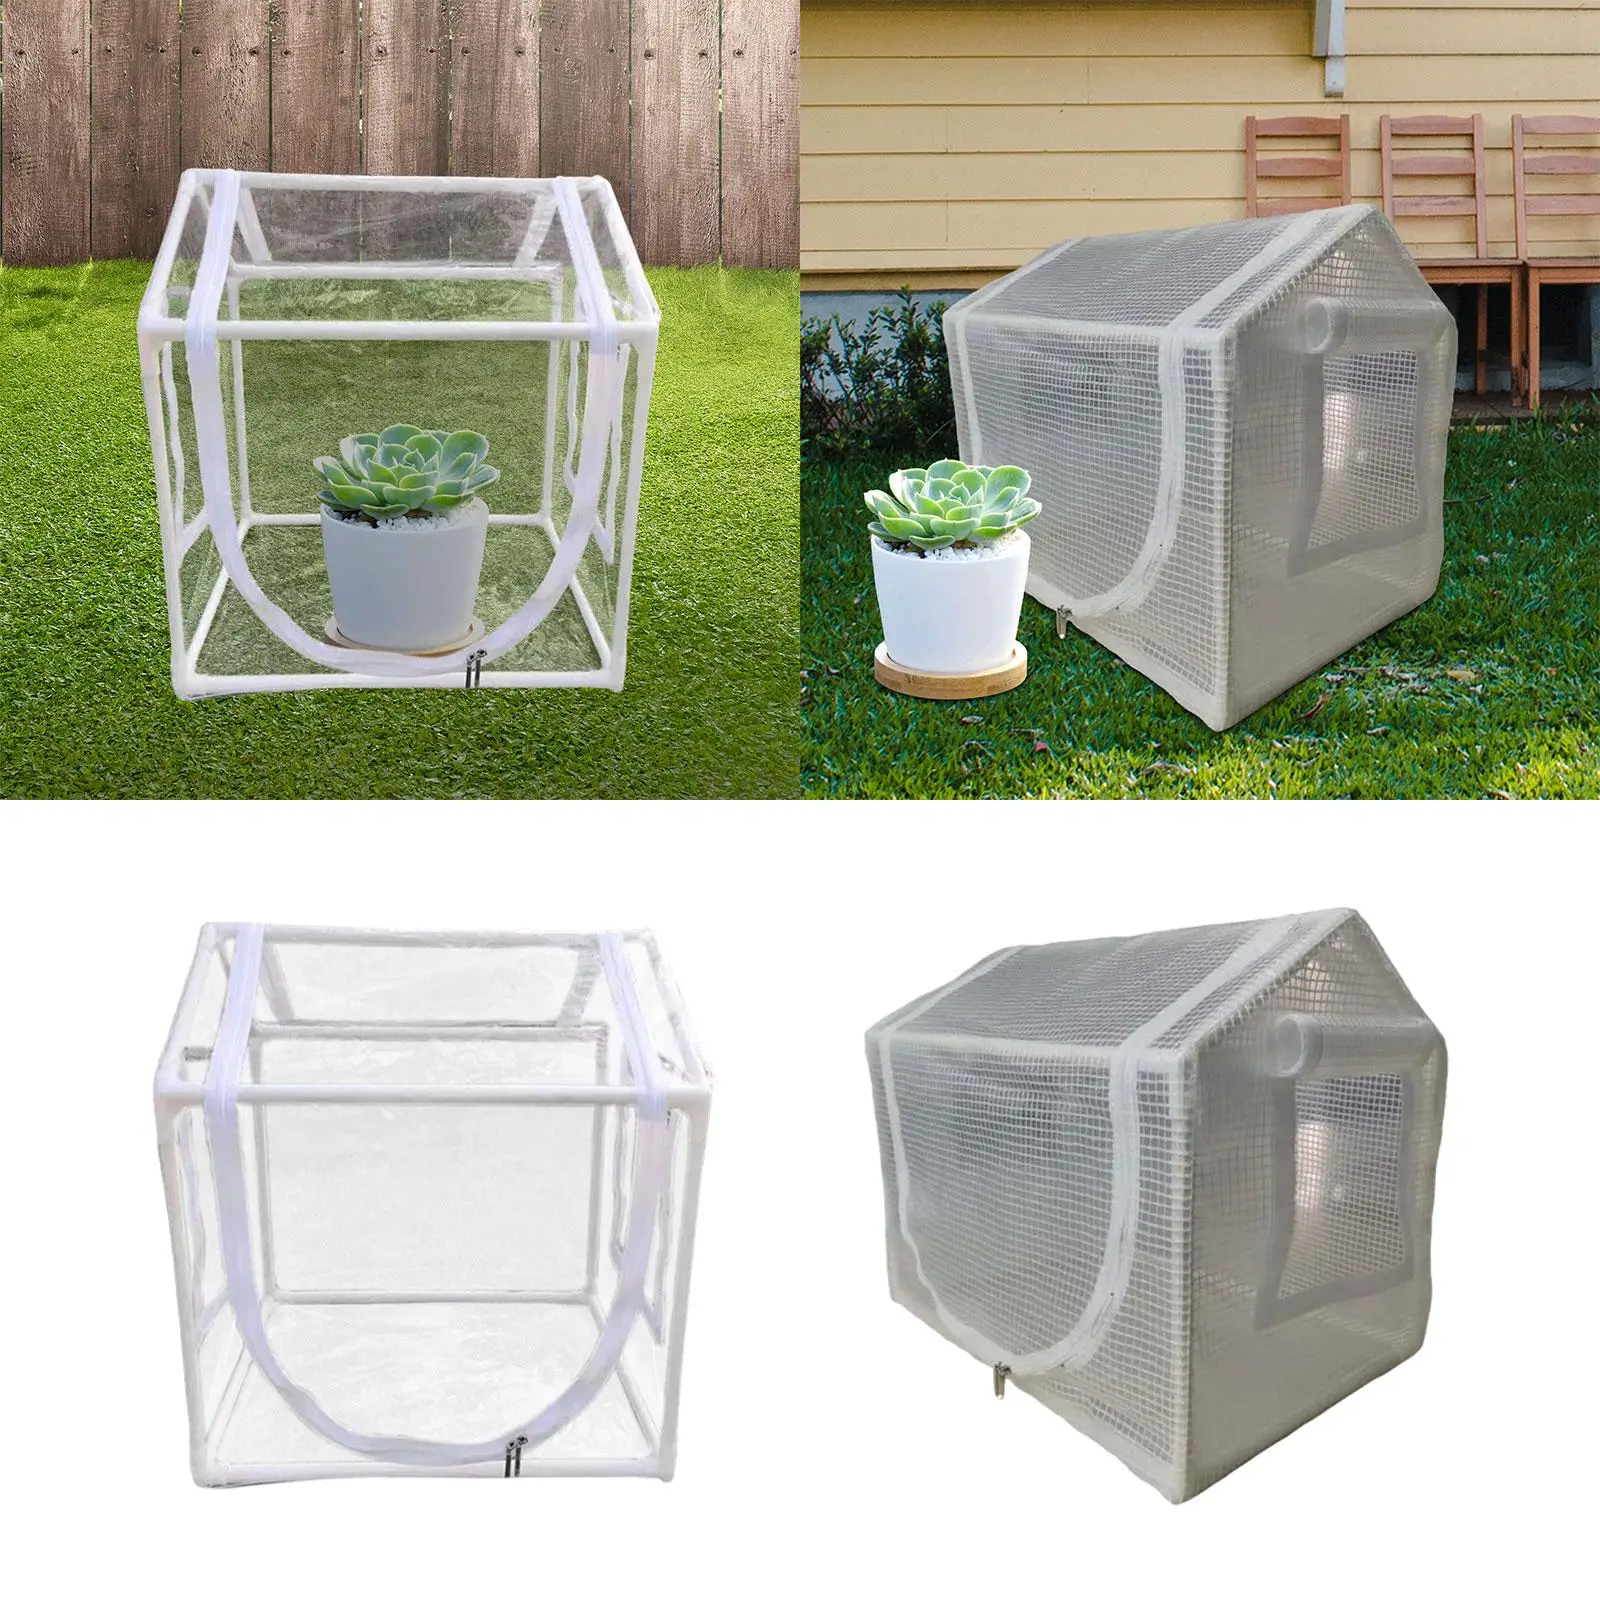 Still Air Box PVC Greenhouse Cover Reusable Easy Storage Yard Indoor Outdoor Planters Box Greenhouse Garden Garden Greenhouse